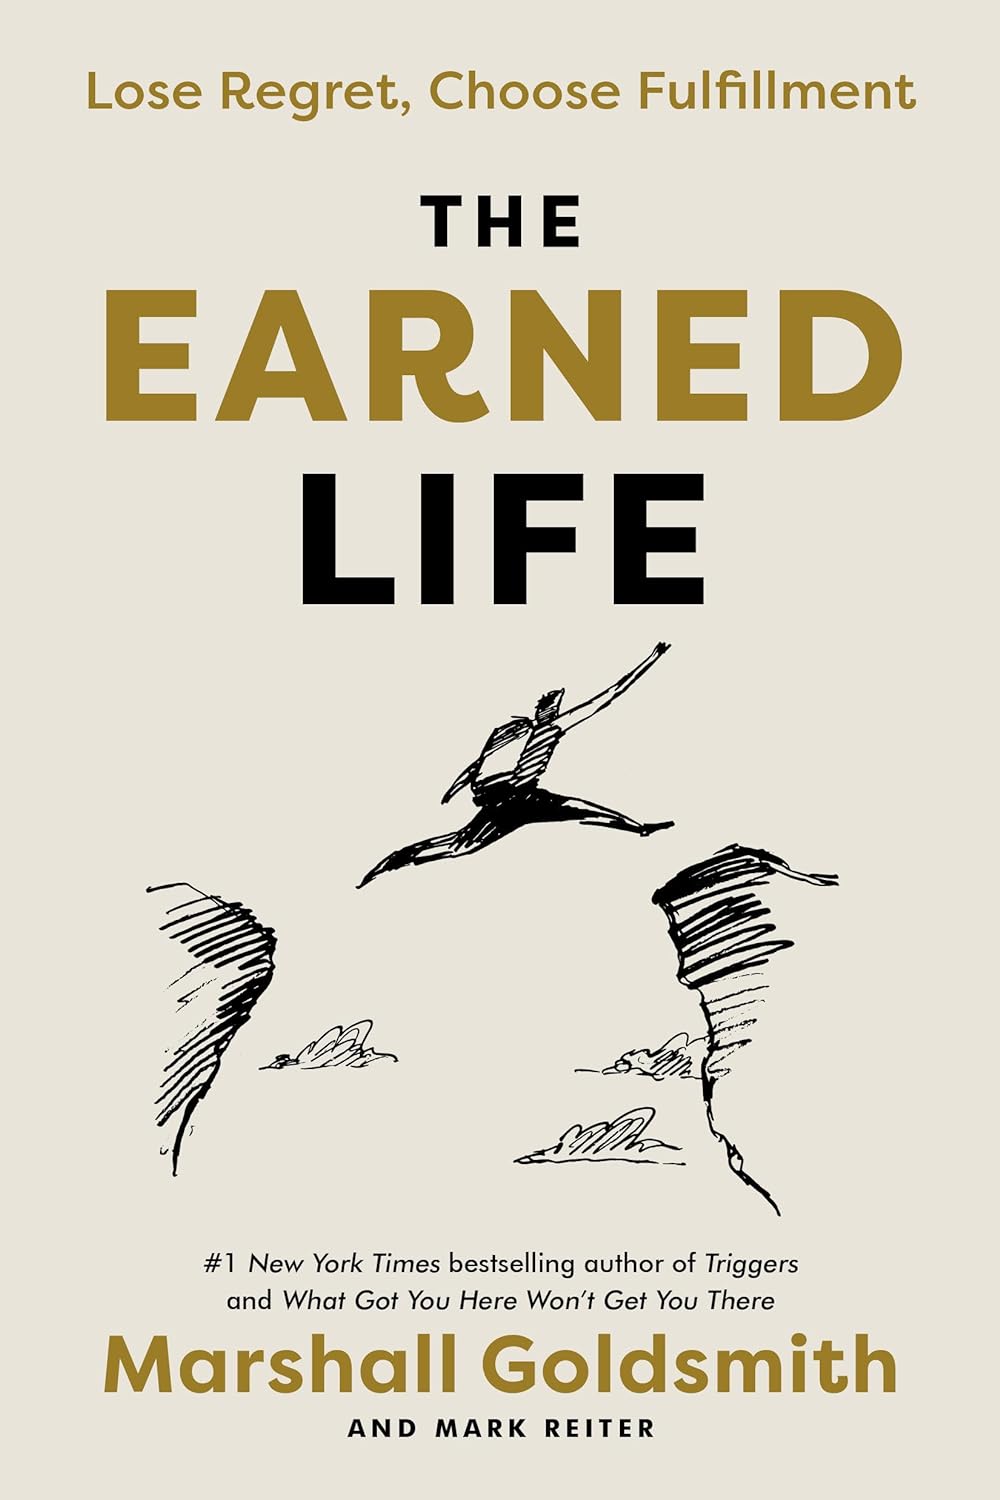 Marshall Goldsmith - The Earned Life Lose Regret, Choose Fulfillment